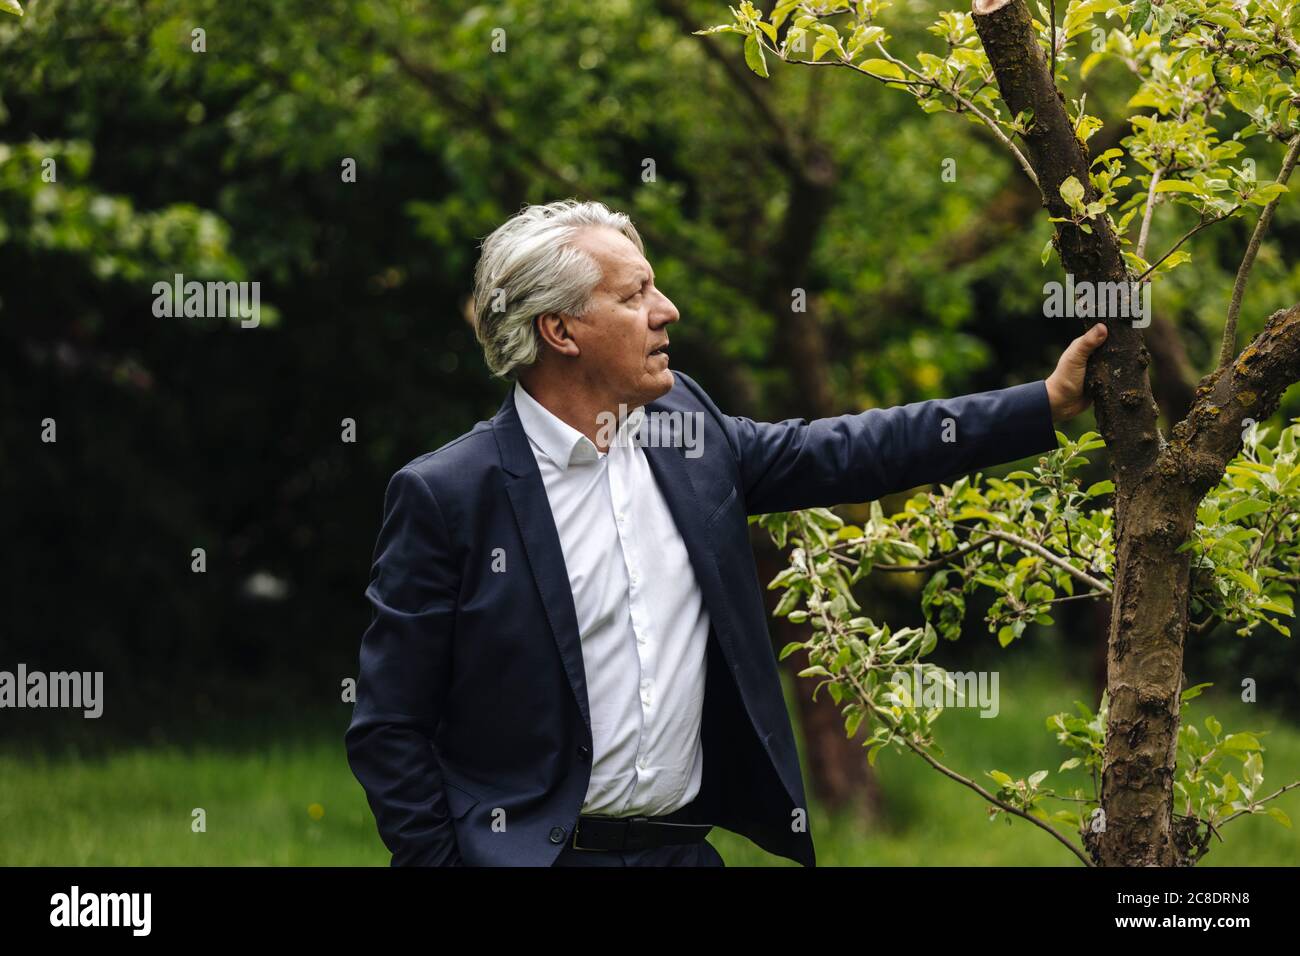 Senior businessman standing at a tree in a rural garden Stock Photo